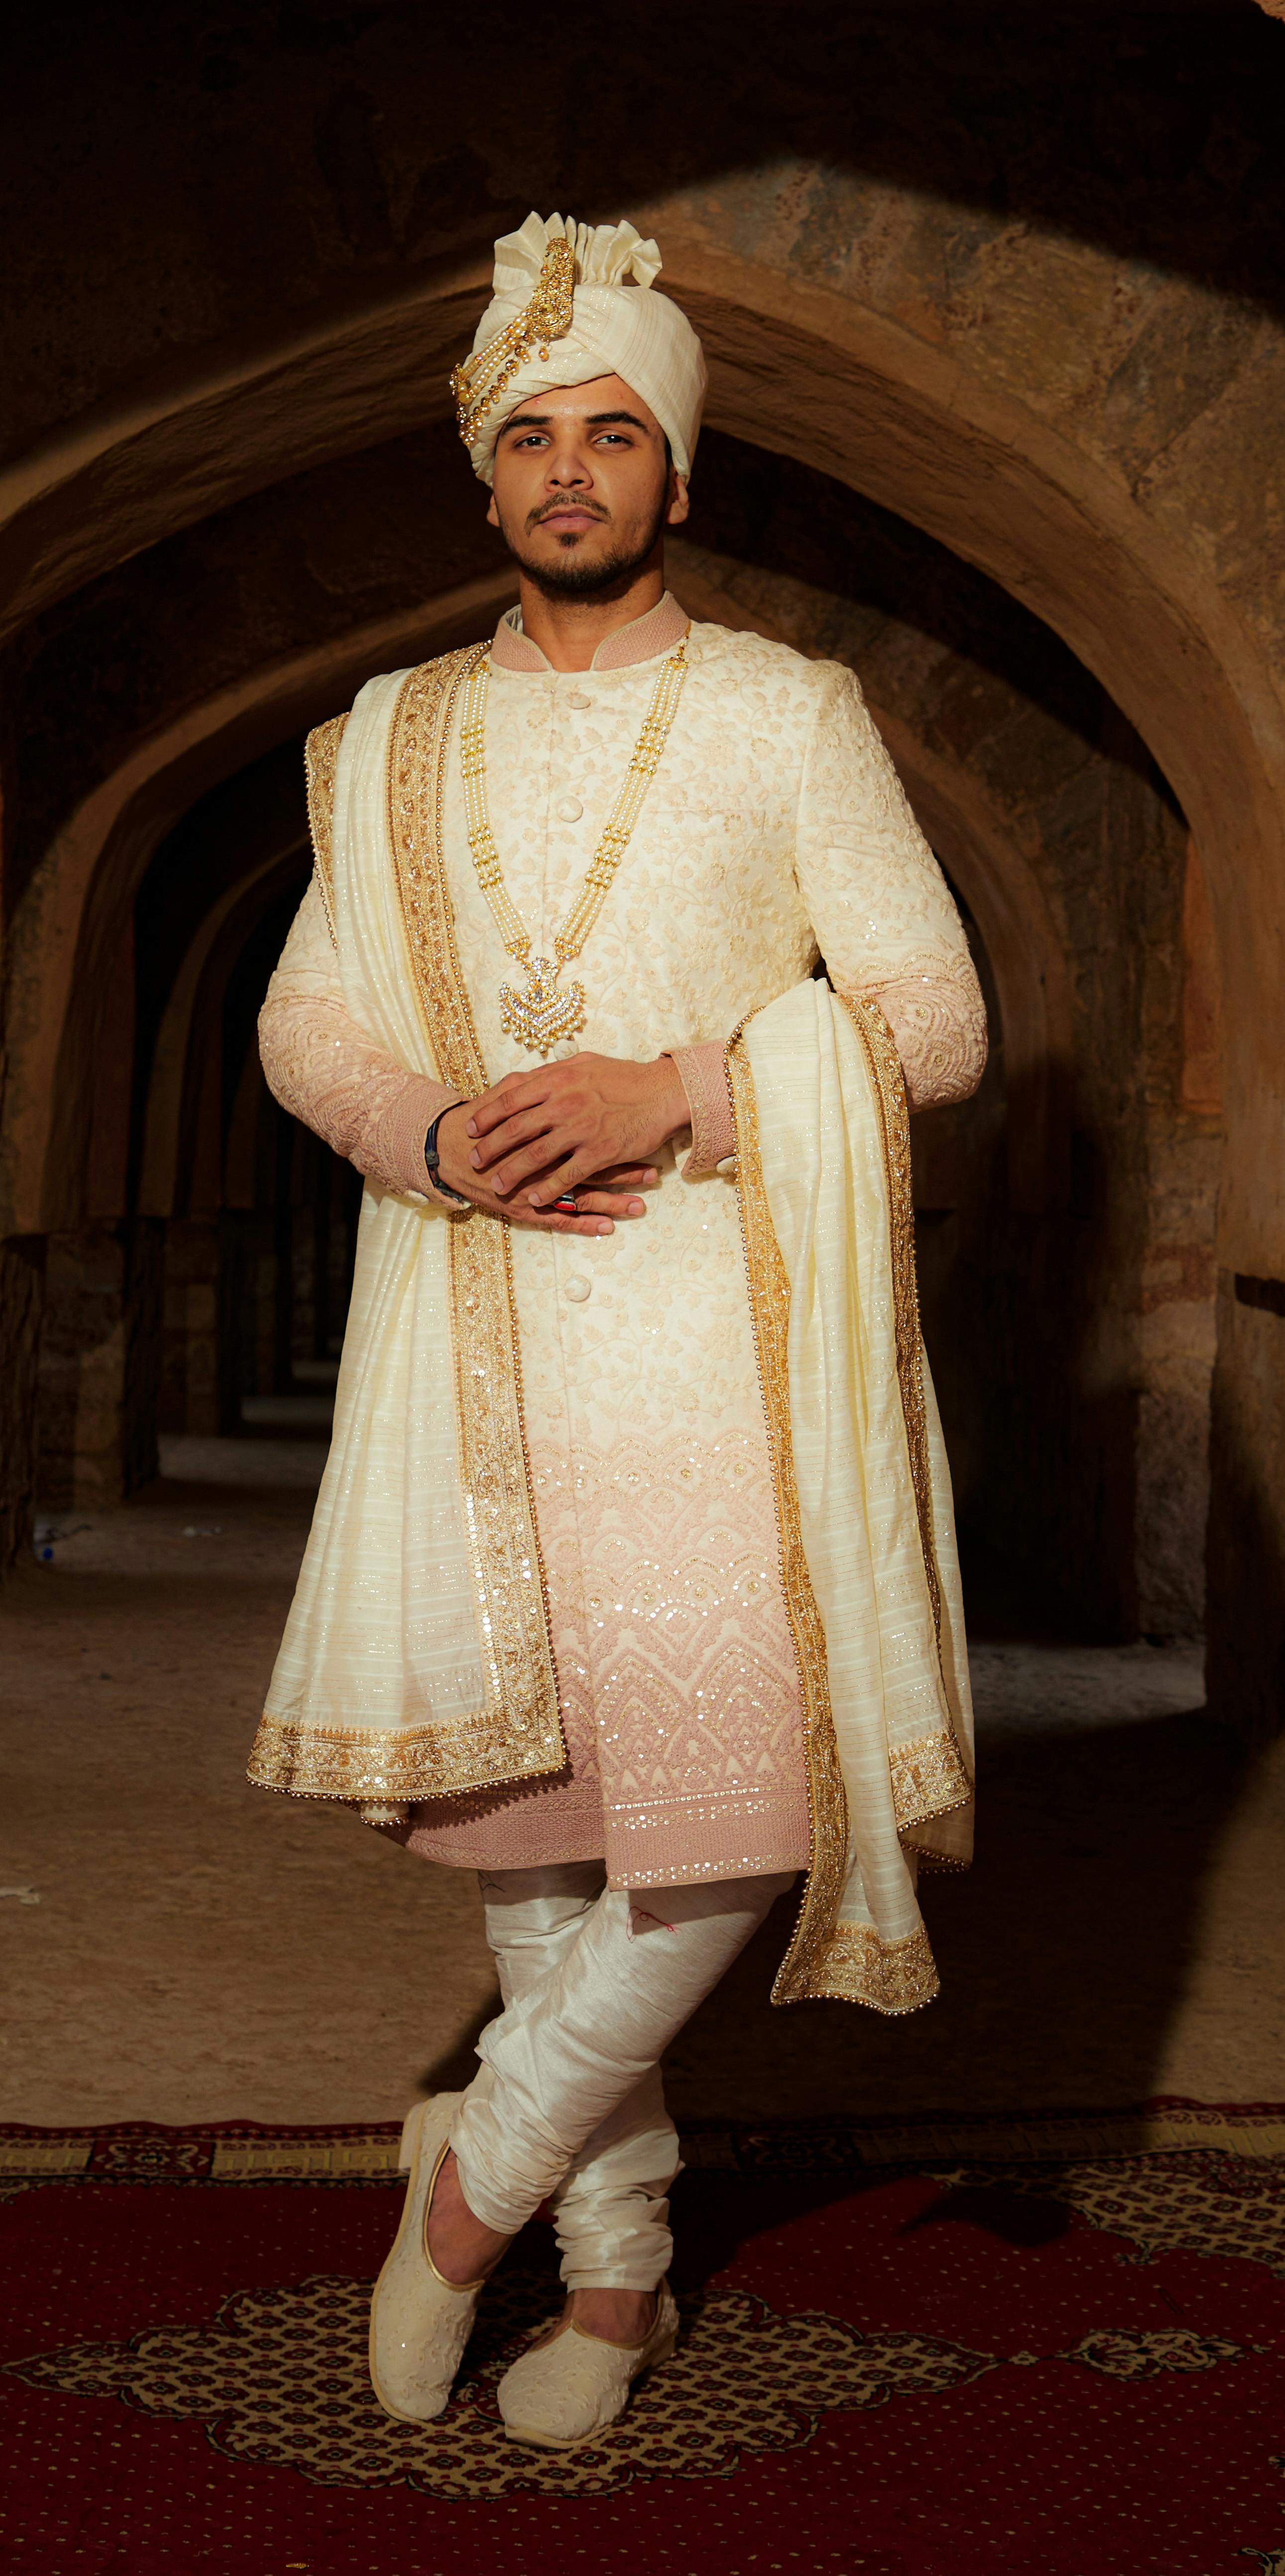 man wearing traditional white clothing posing in a cellar with arches